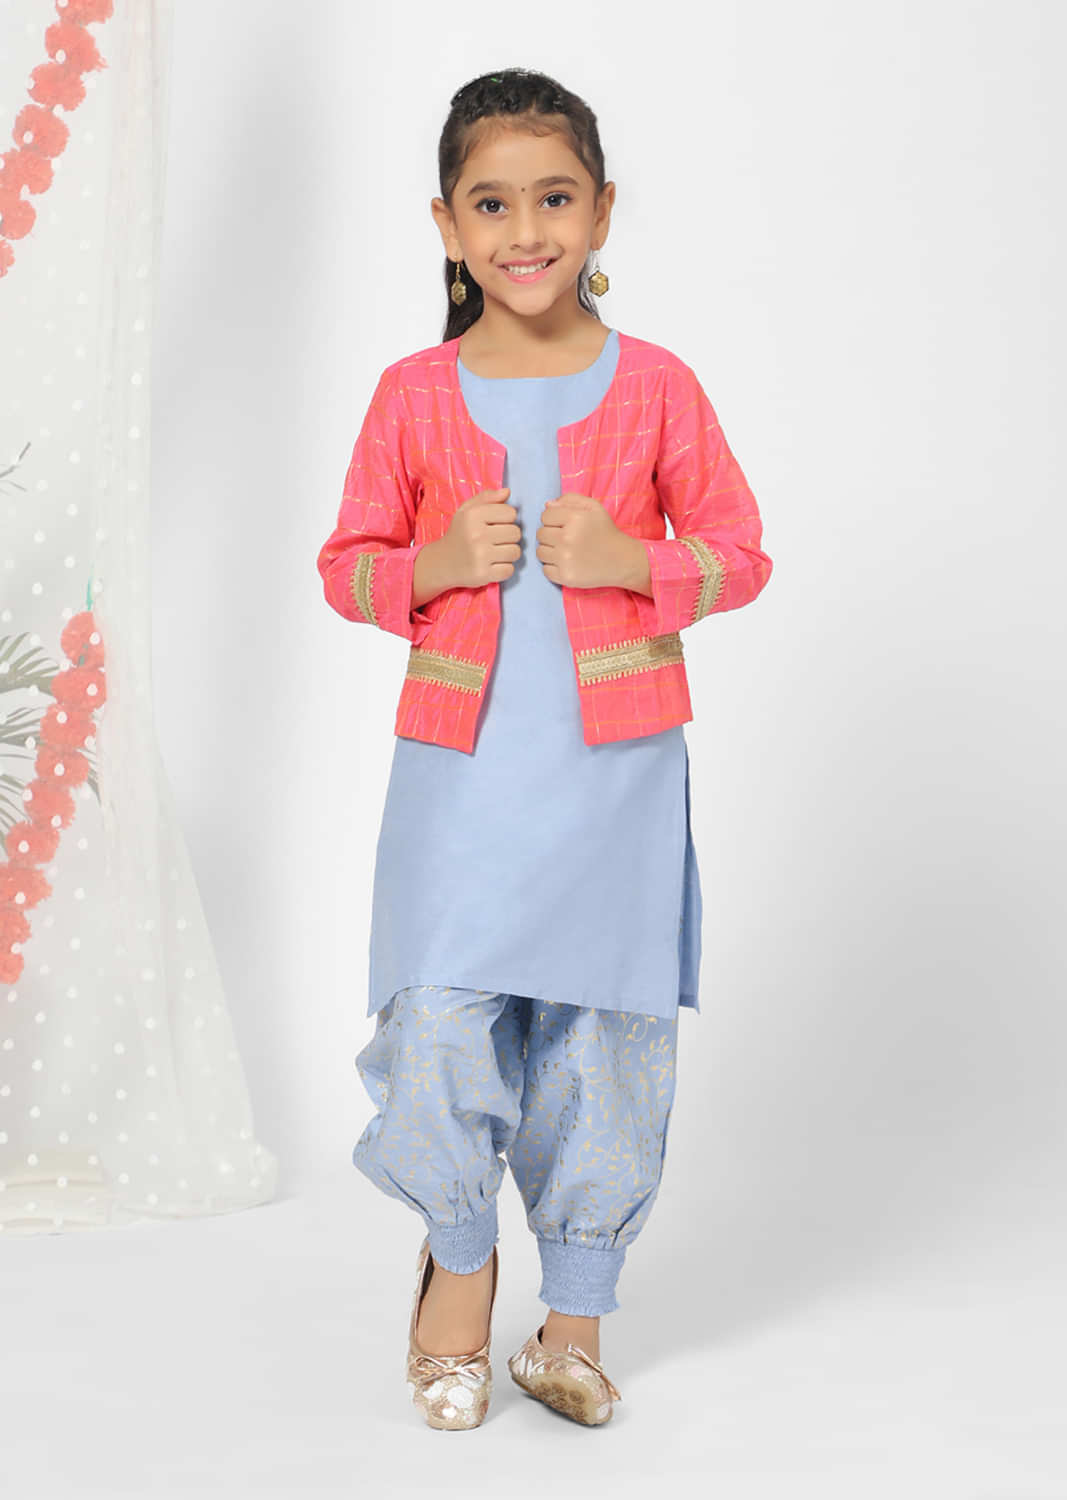 Kalki Girls Blue Patiala Suit In Silk Blend With Floral Print And Pink Jacket By Mini Chic